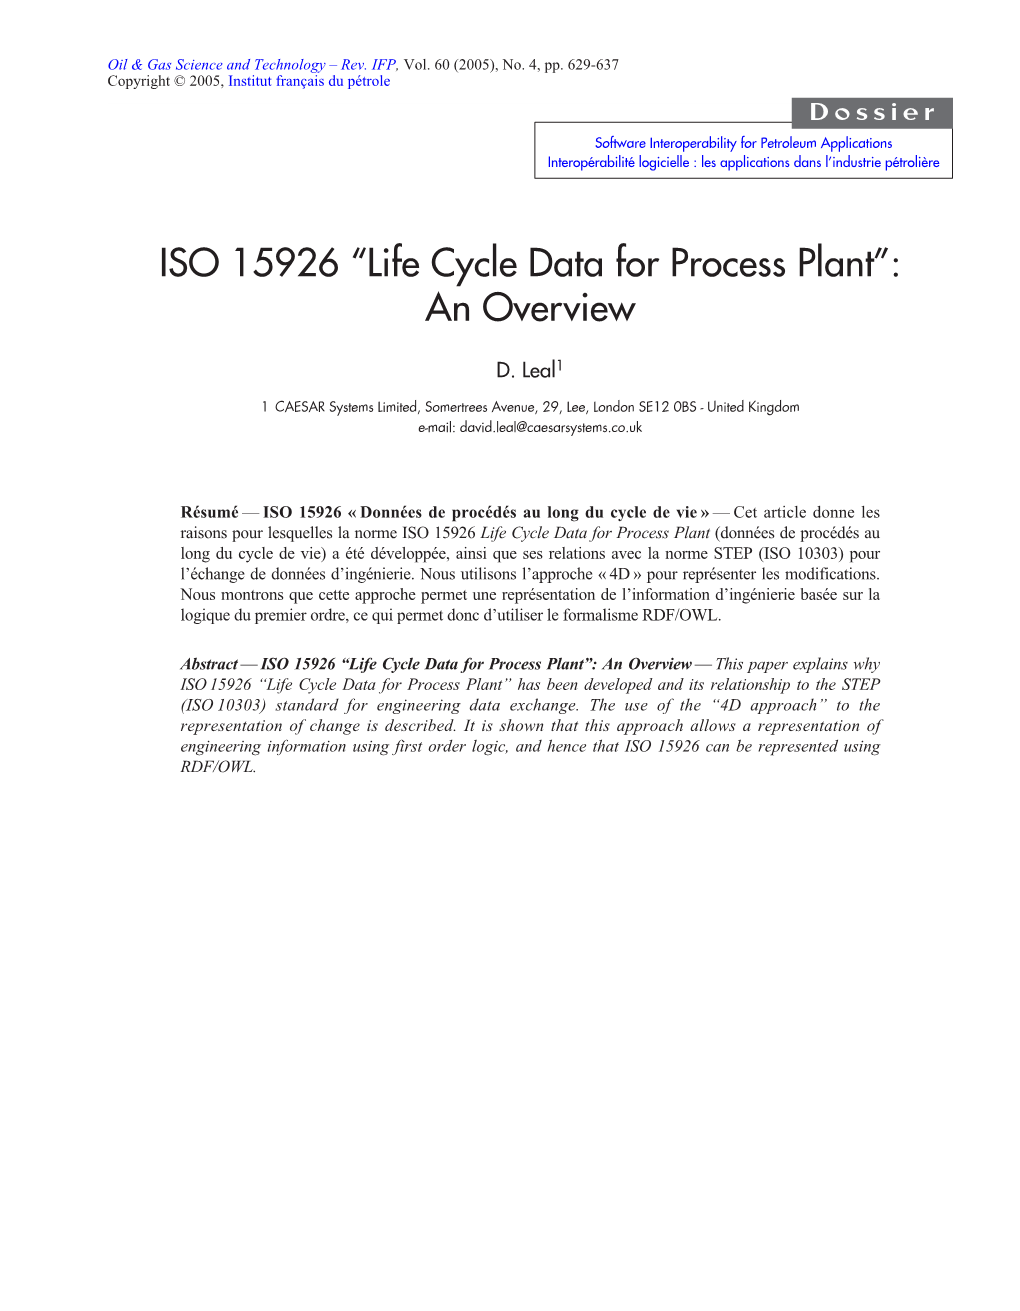 ISO 15926 “Life Cycle Data for Process Plant”: an Overview